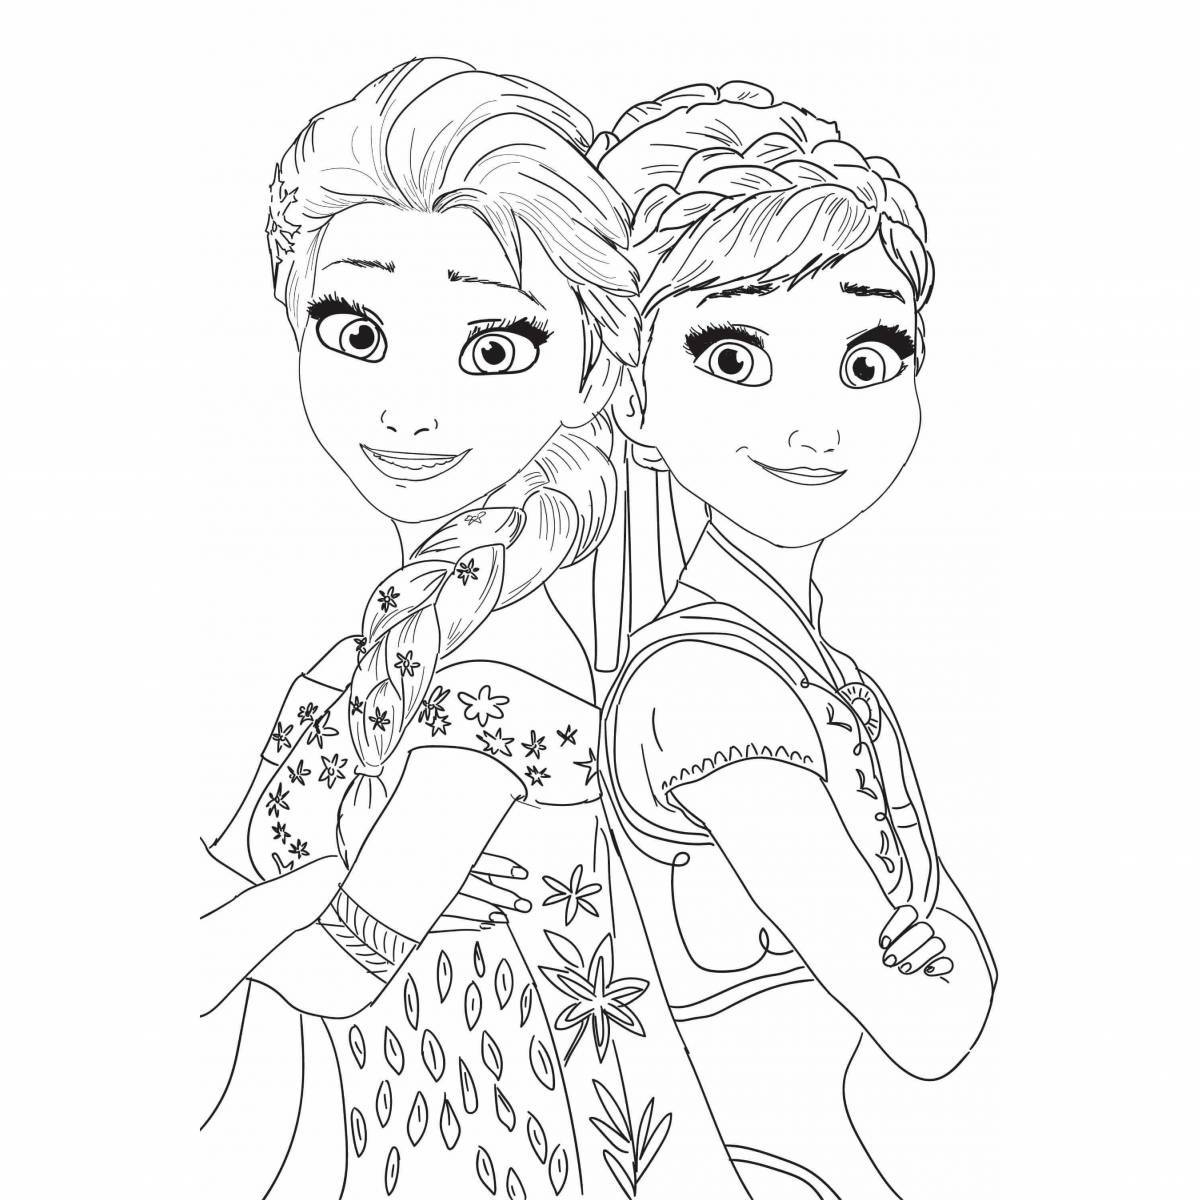 Elsa and anna for kids #9